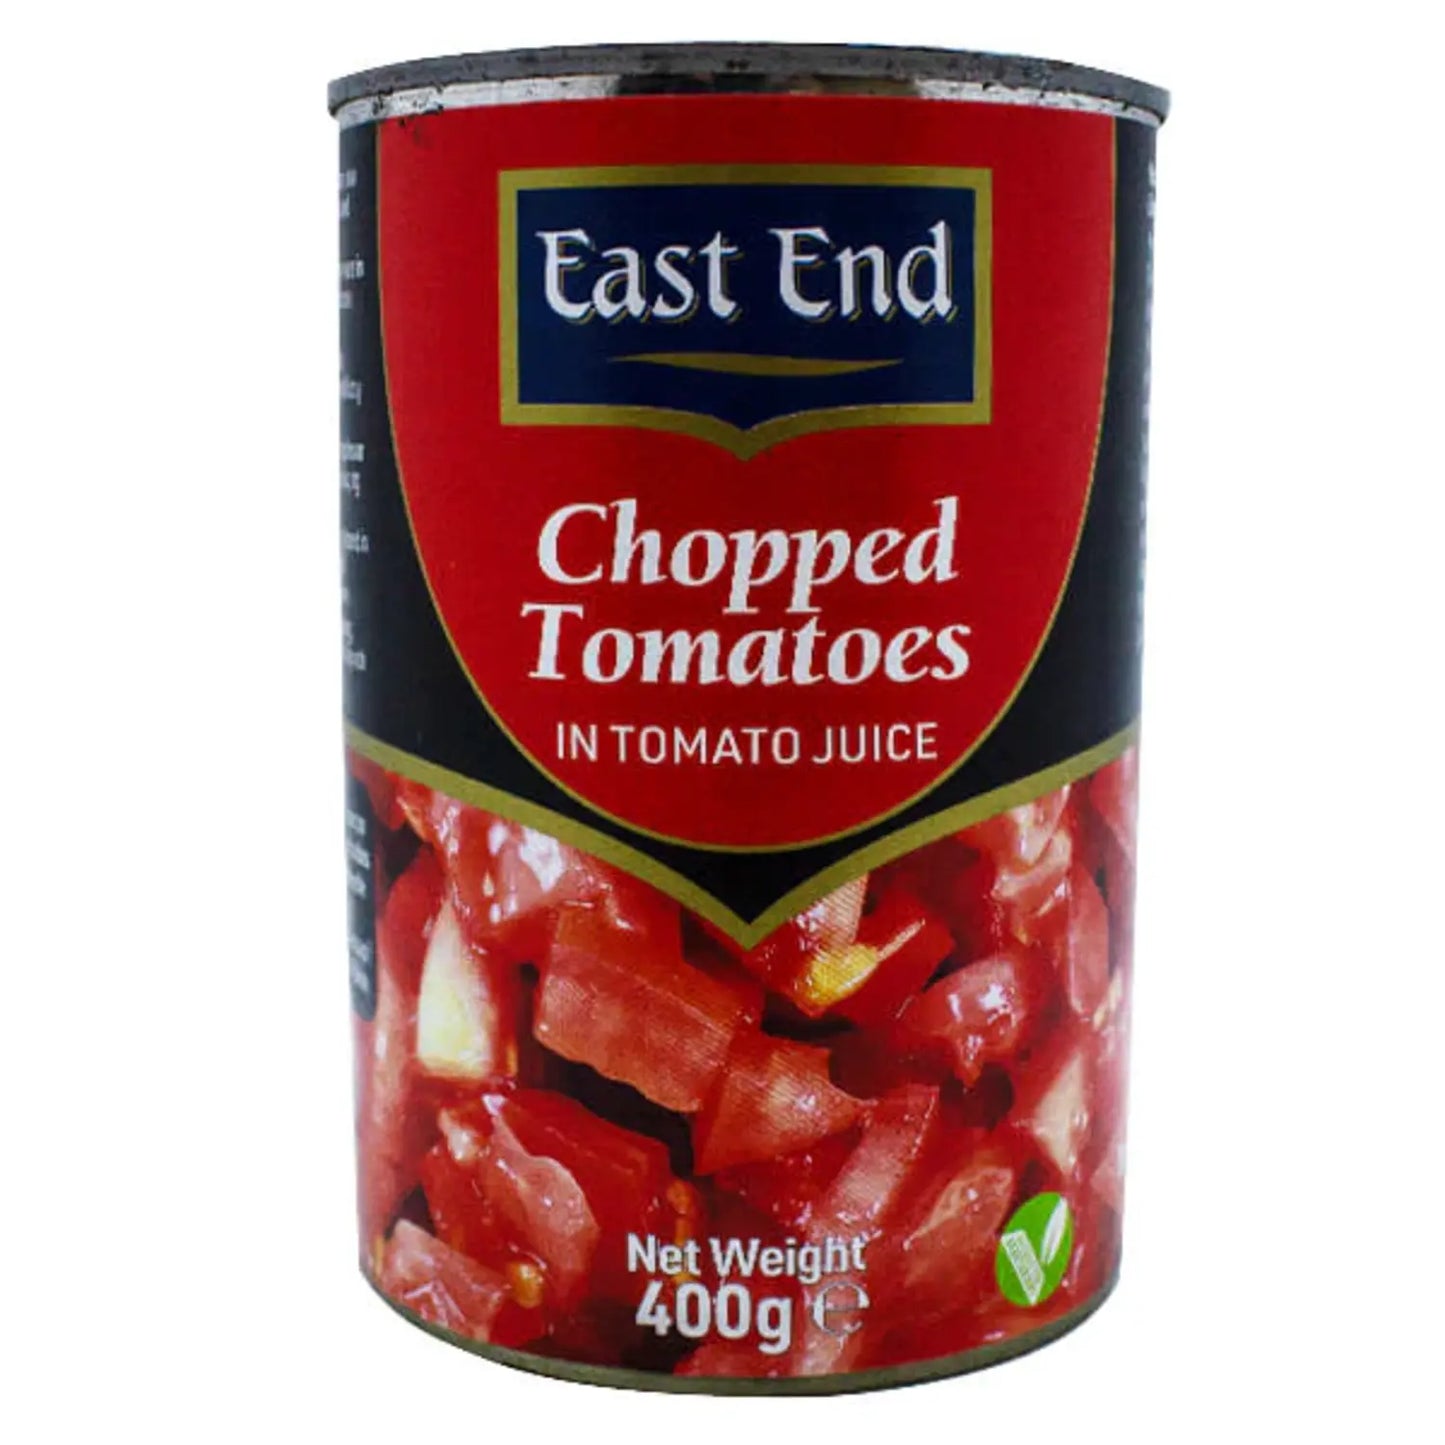 East End Chopped Tomatoes 400g